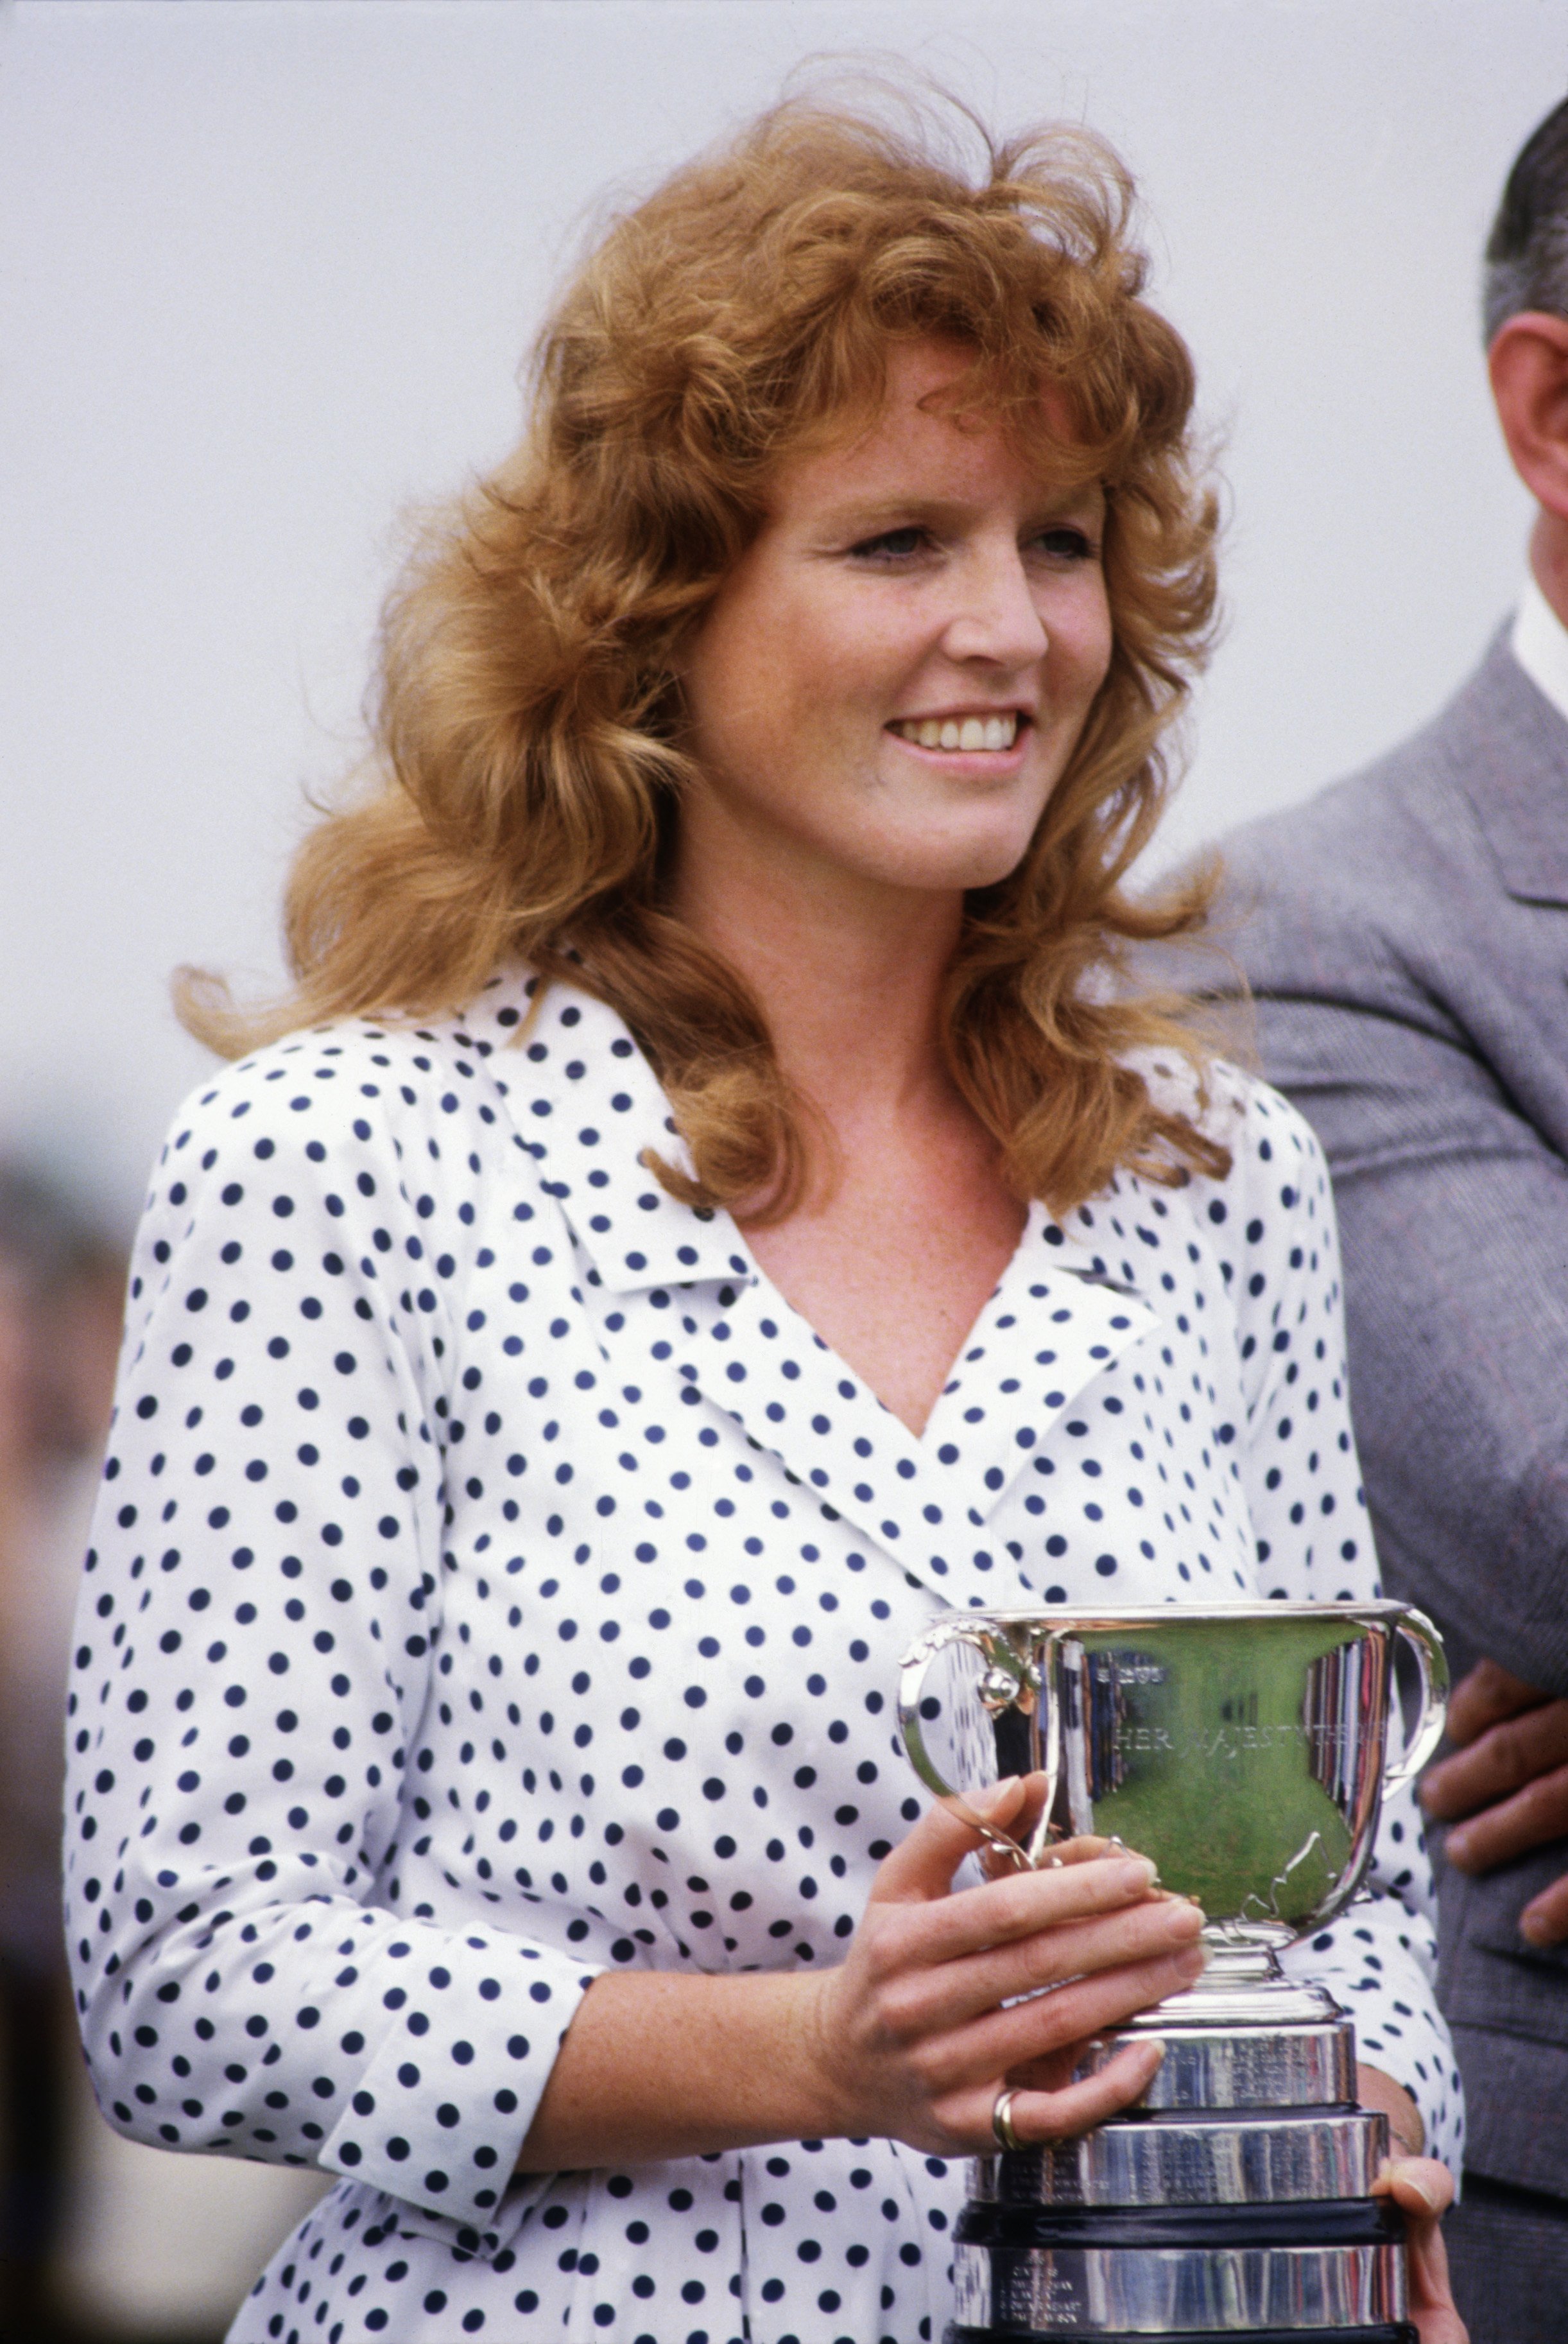 Sarah, Duchess of York presenting the prizes at the end of a polo match on June 8, 1986 at Guards Polo Club, Smiths Lawn, Windsor, Berkshire | Photo: GettyImages